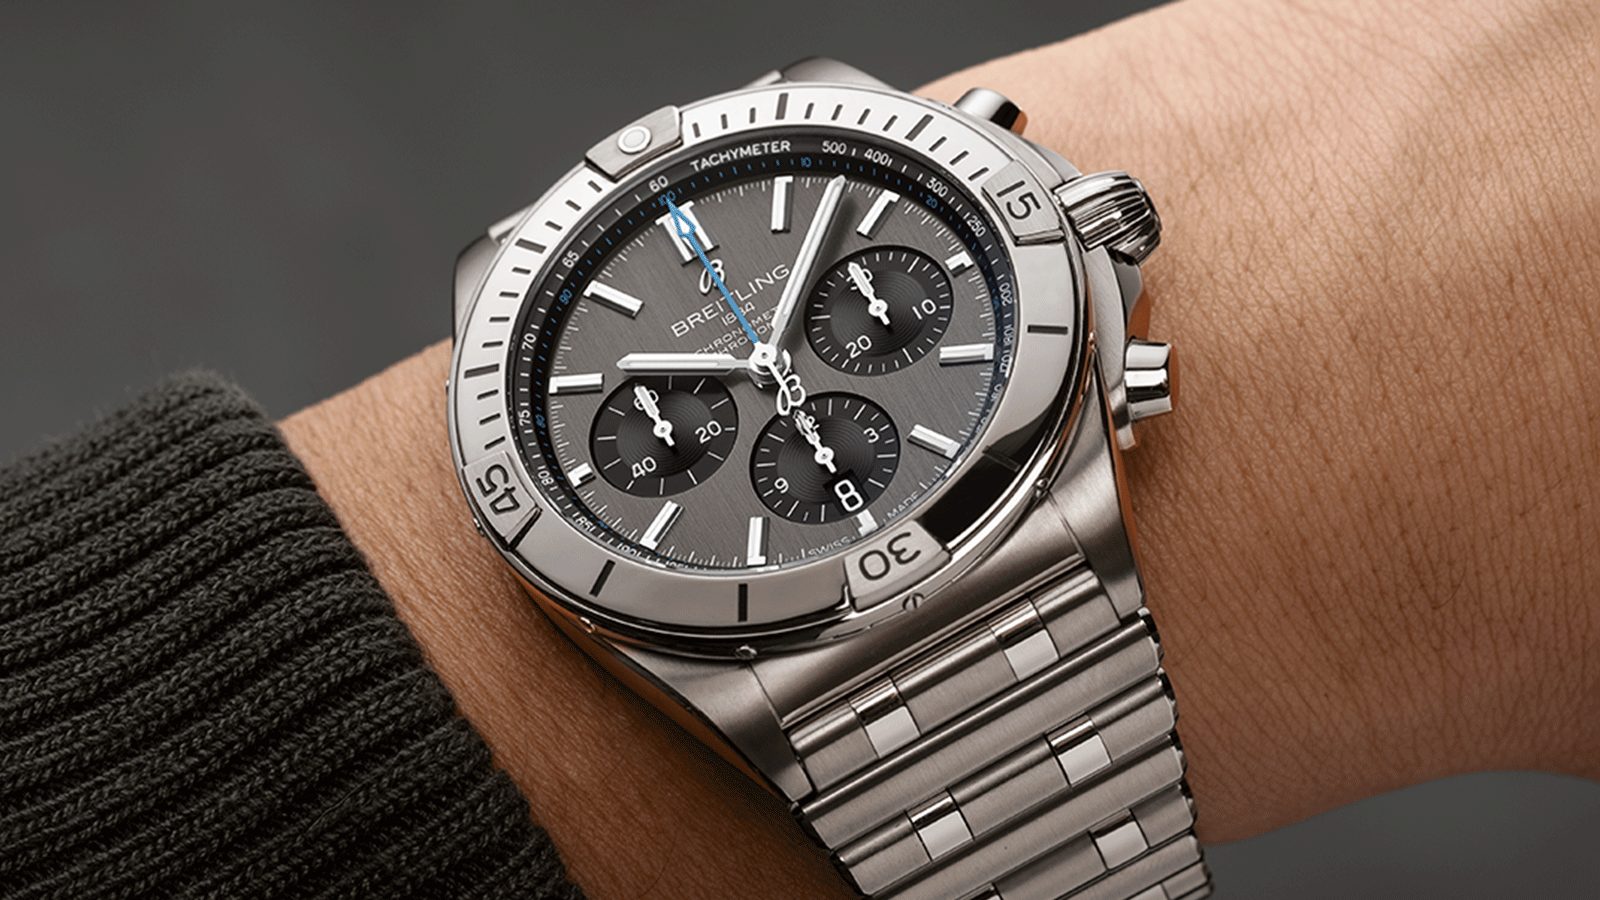 The Chronomat holds a significant place in Breitling’s history. Introduced in 1984, at a time where extra-thin quartz timepieces were the order of the day, Breitling placed a bold bet on an impressively proportioned mechanical watch.